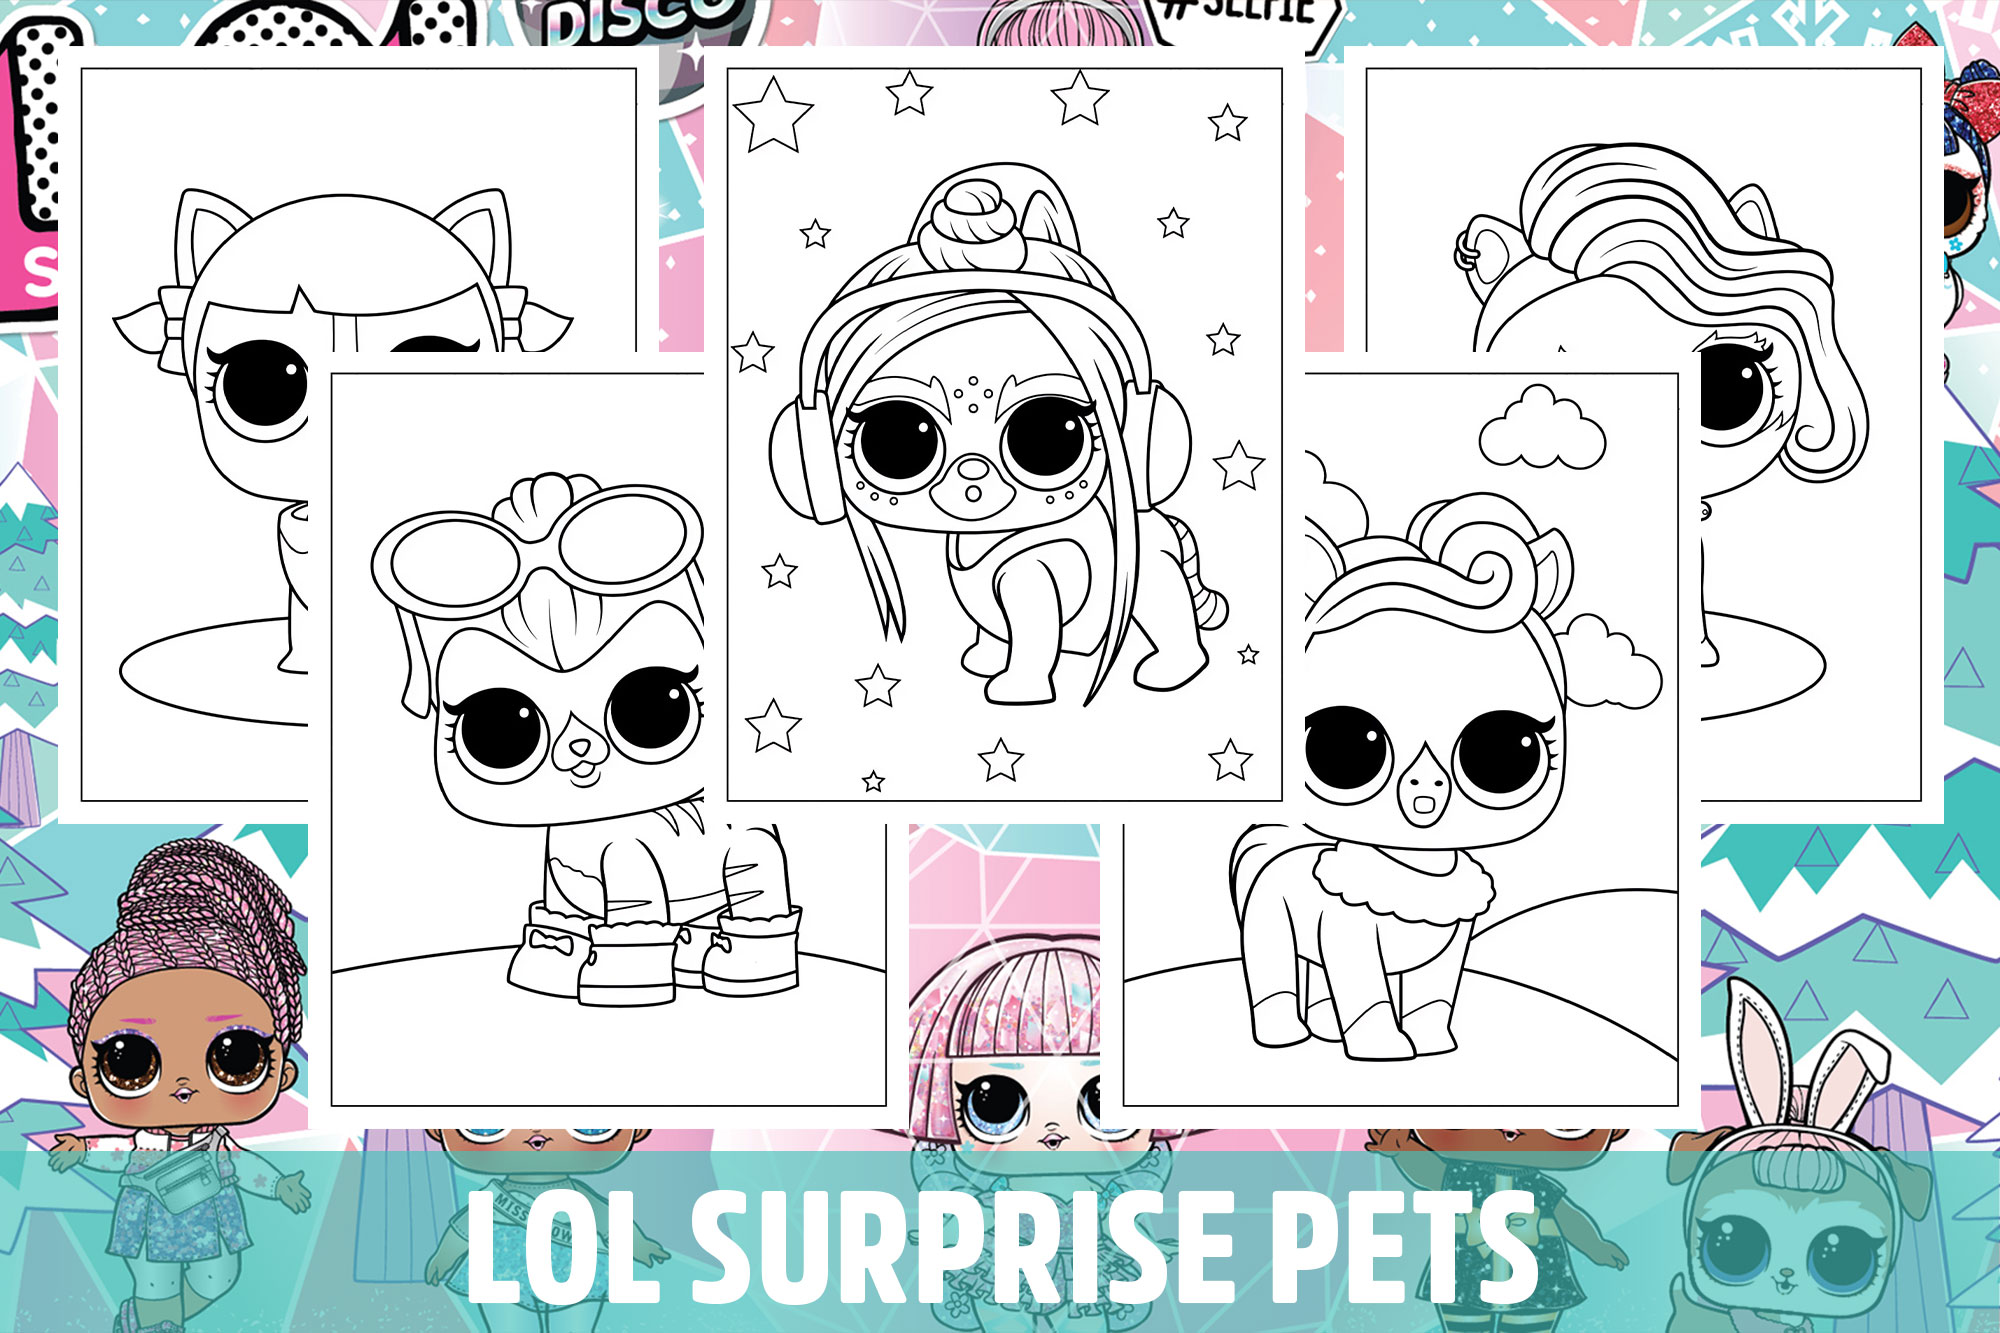 Lol surprise pets coloring pages for kids girls boys teens birthday school activity made by teachers